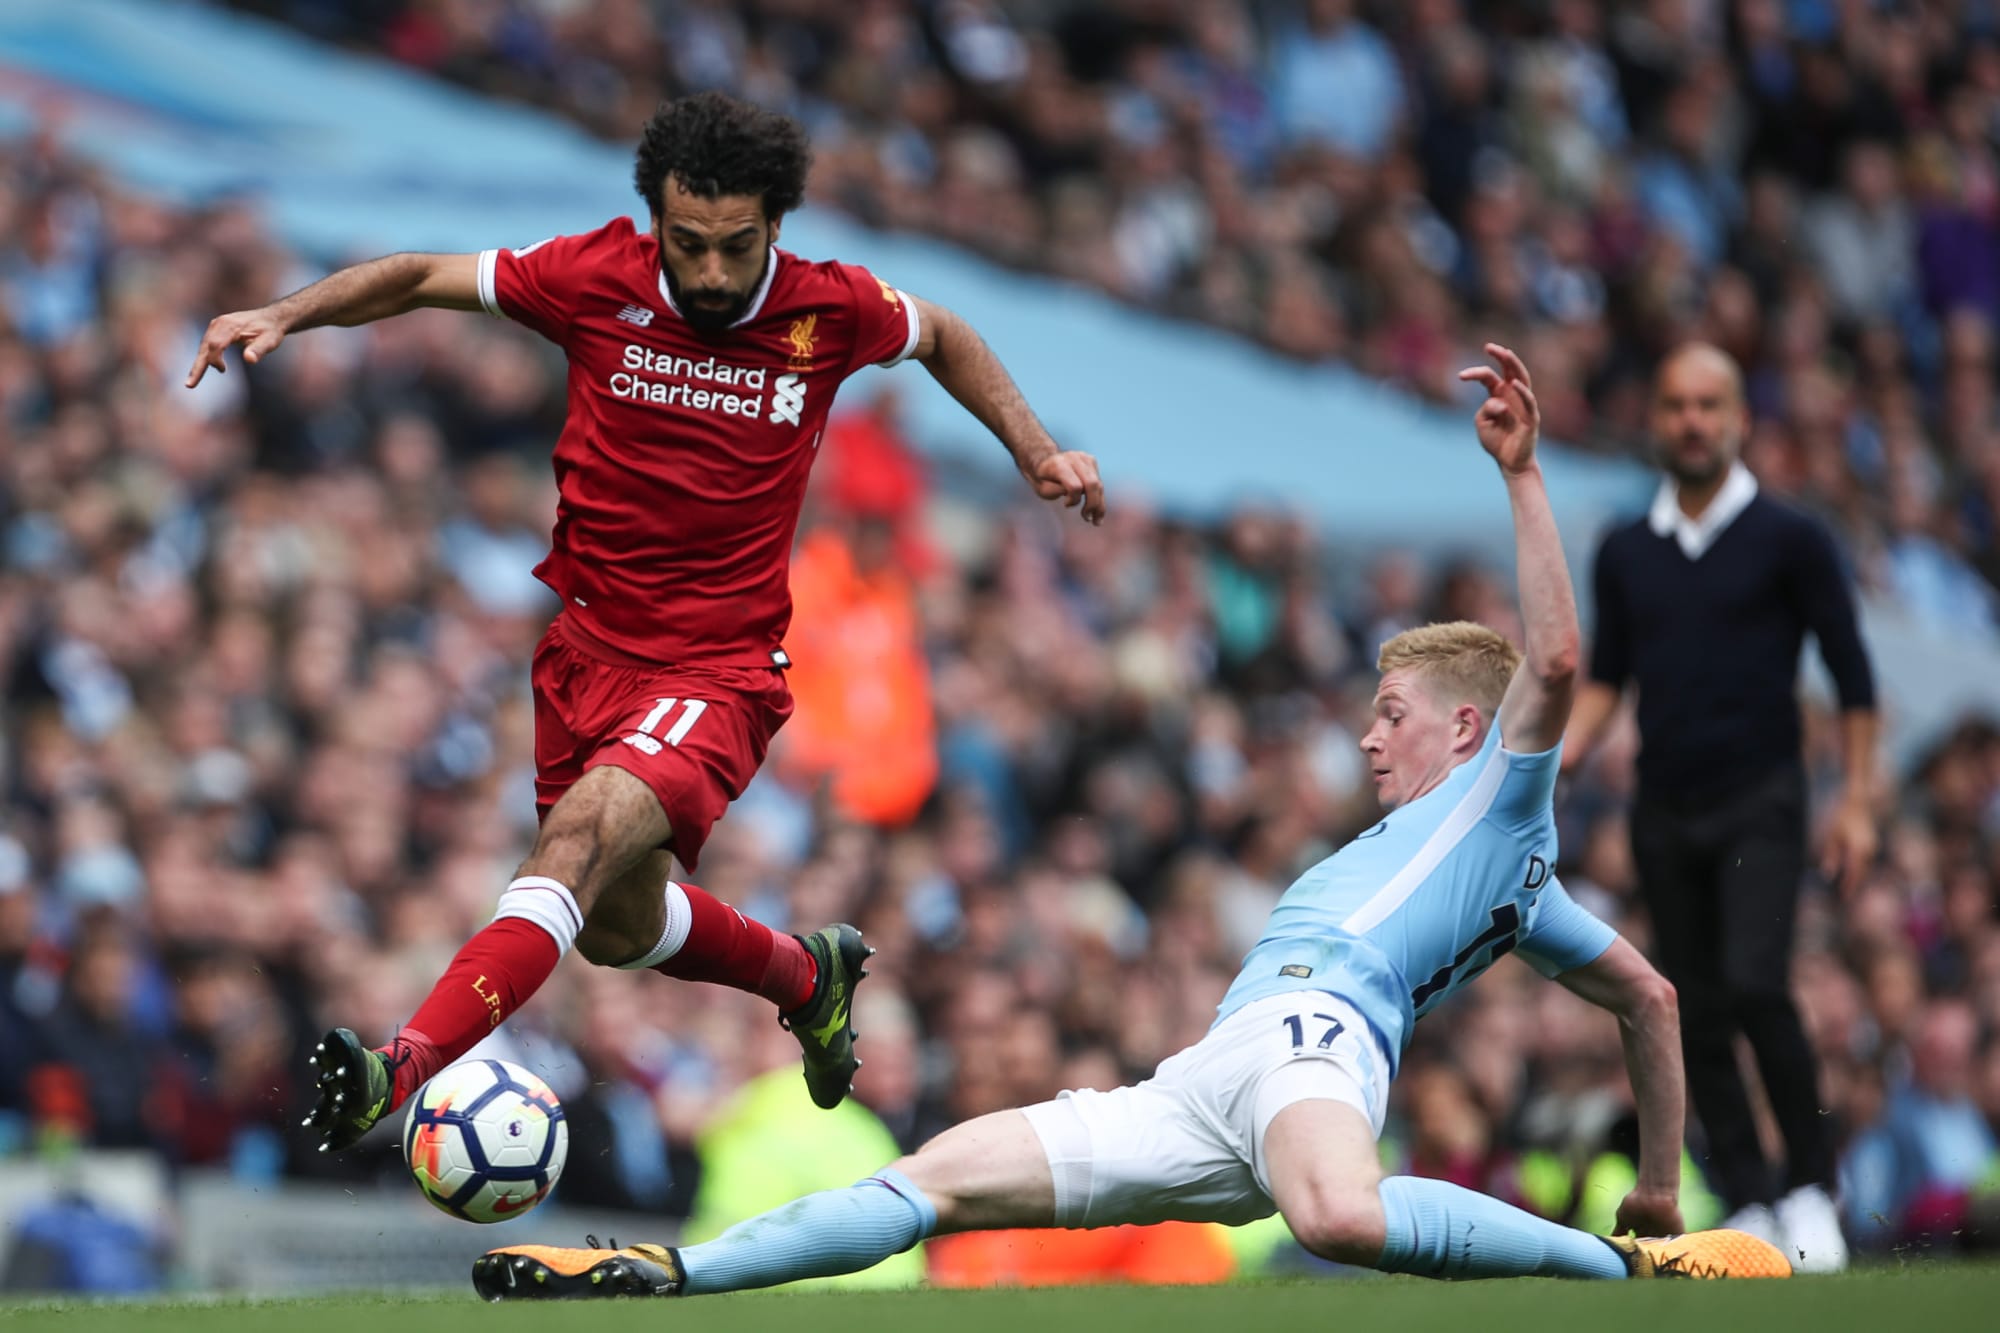 Mohamed Salah and Kevin de Bruyne playing for Liverpool and Manchester City respectively.